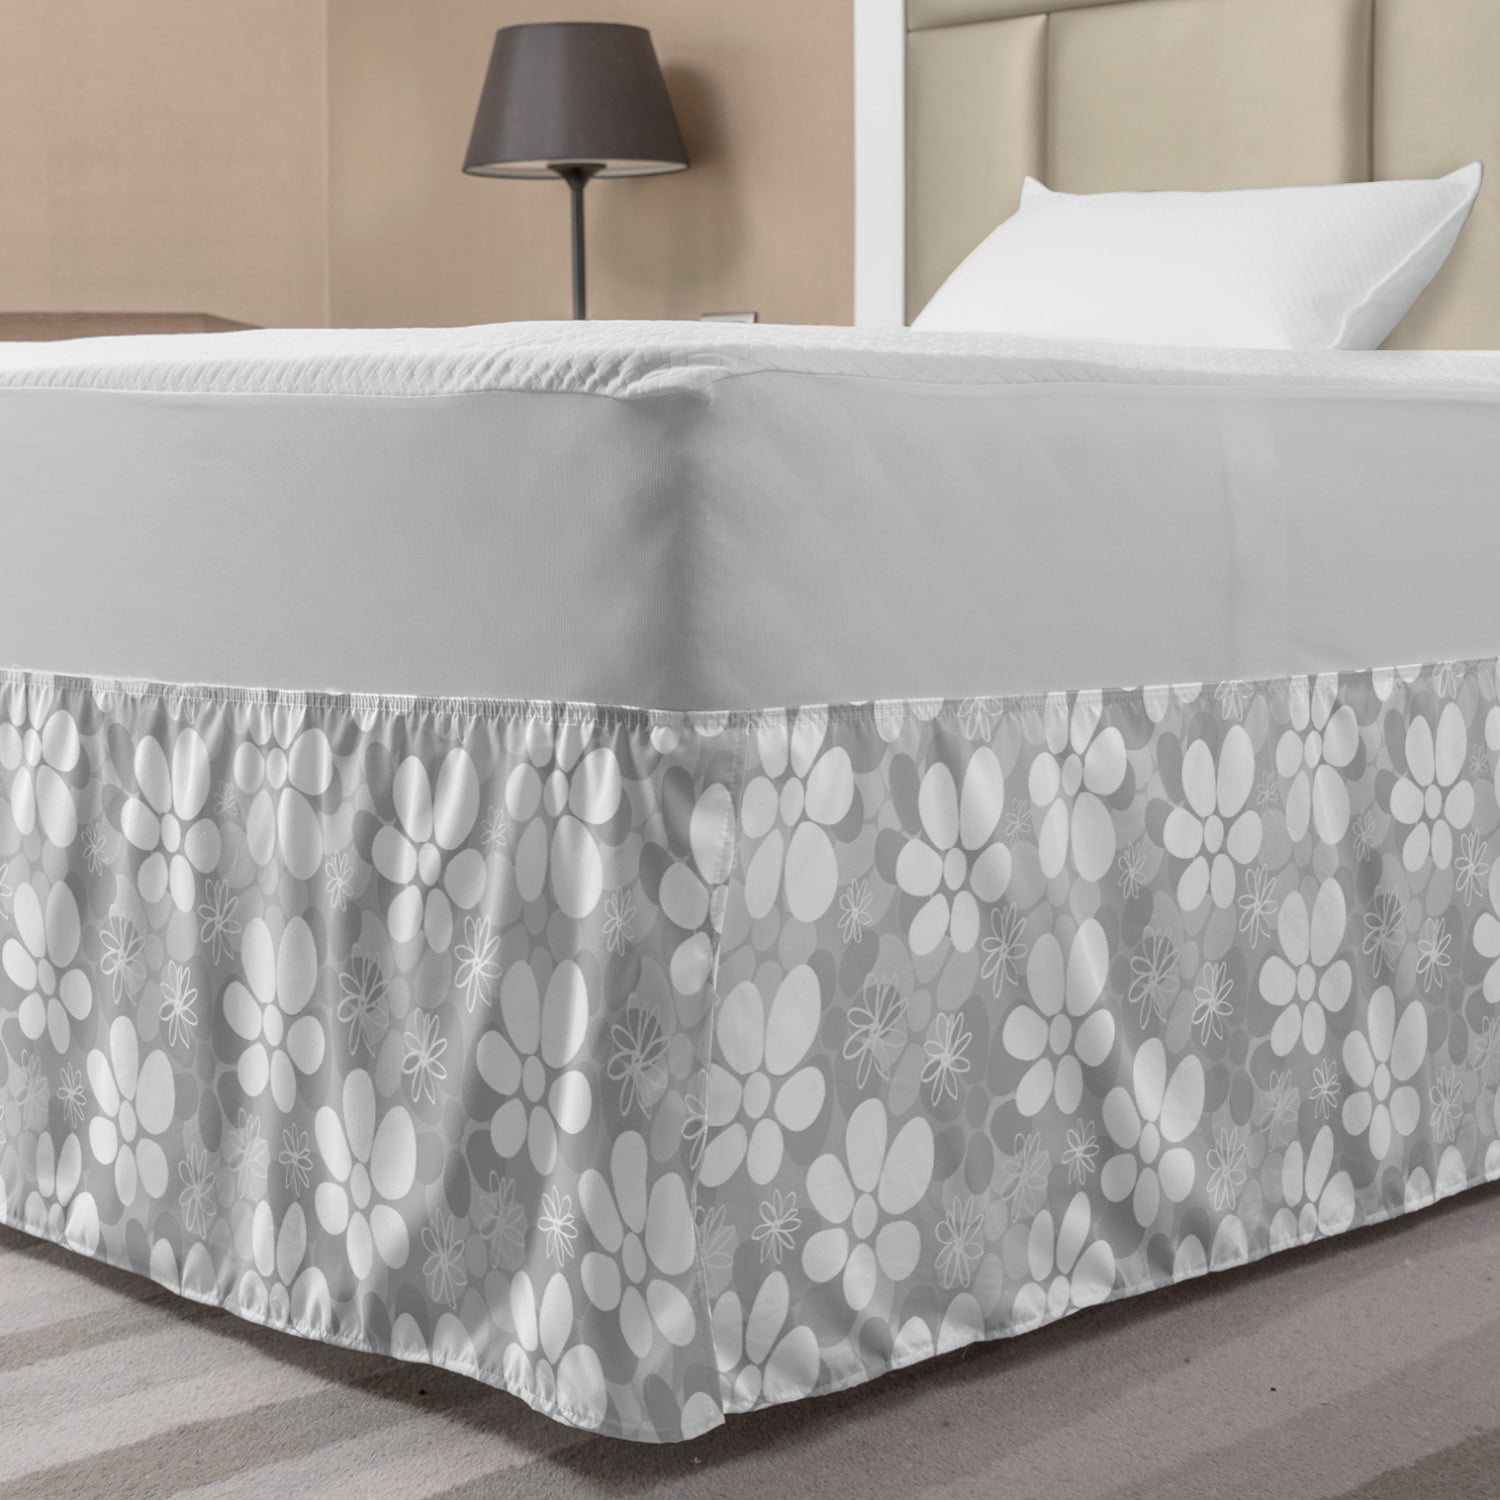 Floral Bed Skirt, Romantic Overlapping Flowers in Scribbled Form ...